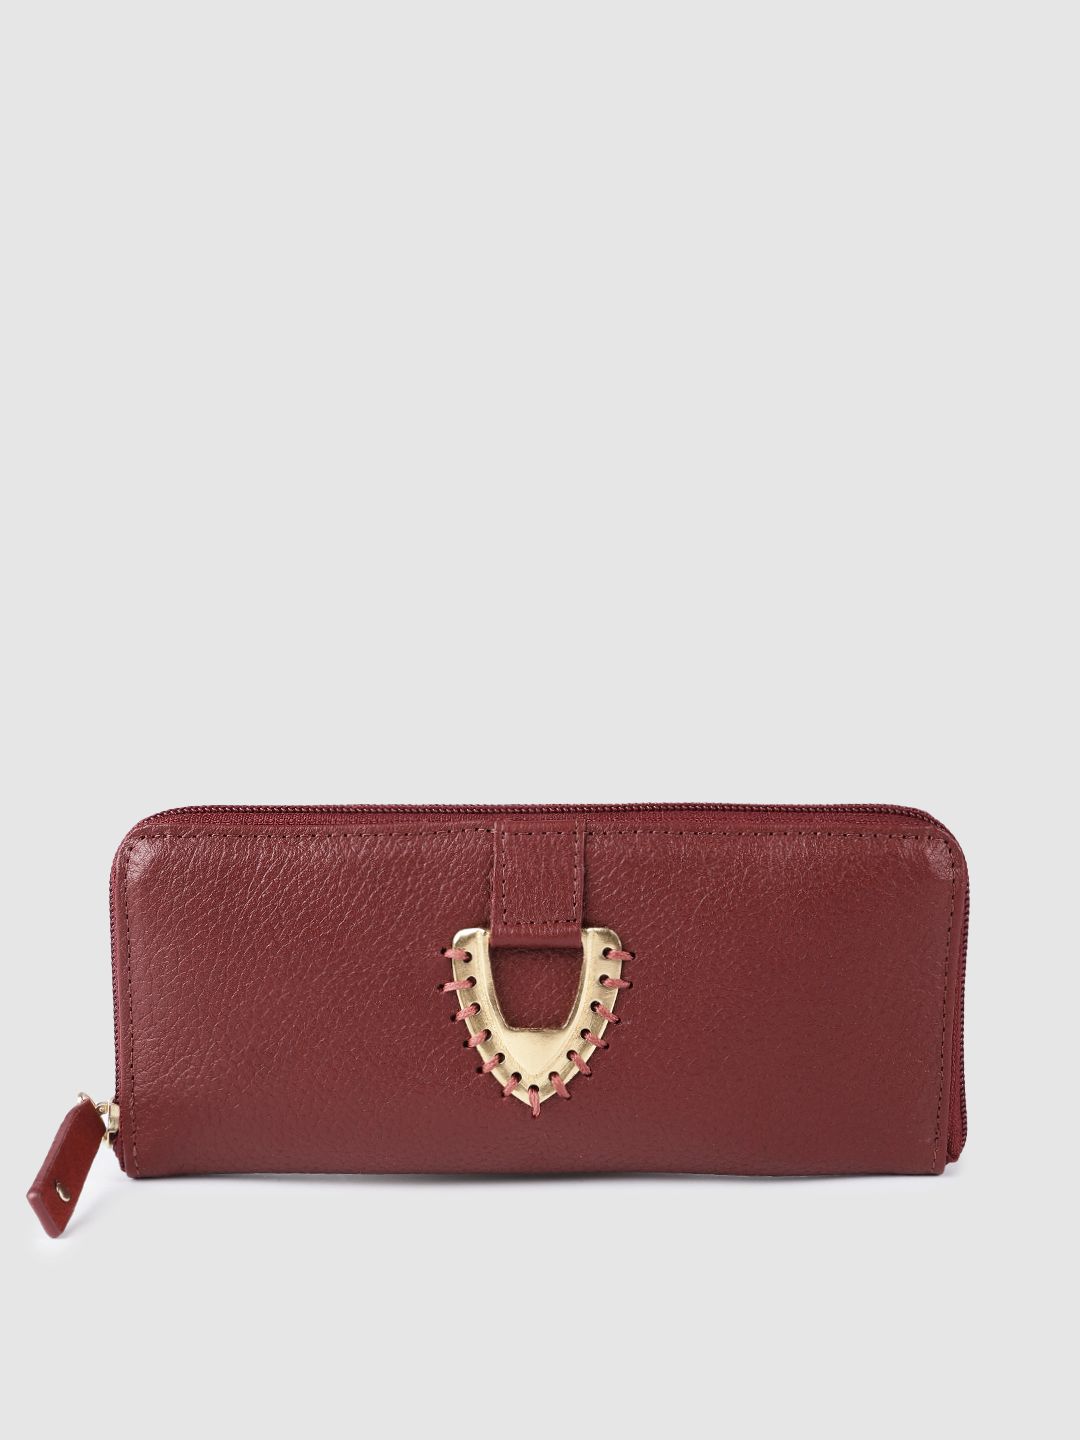 Hidesign Women Red Leather Zip Around Wallet Price in India